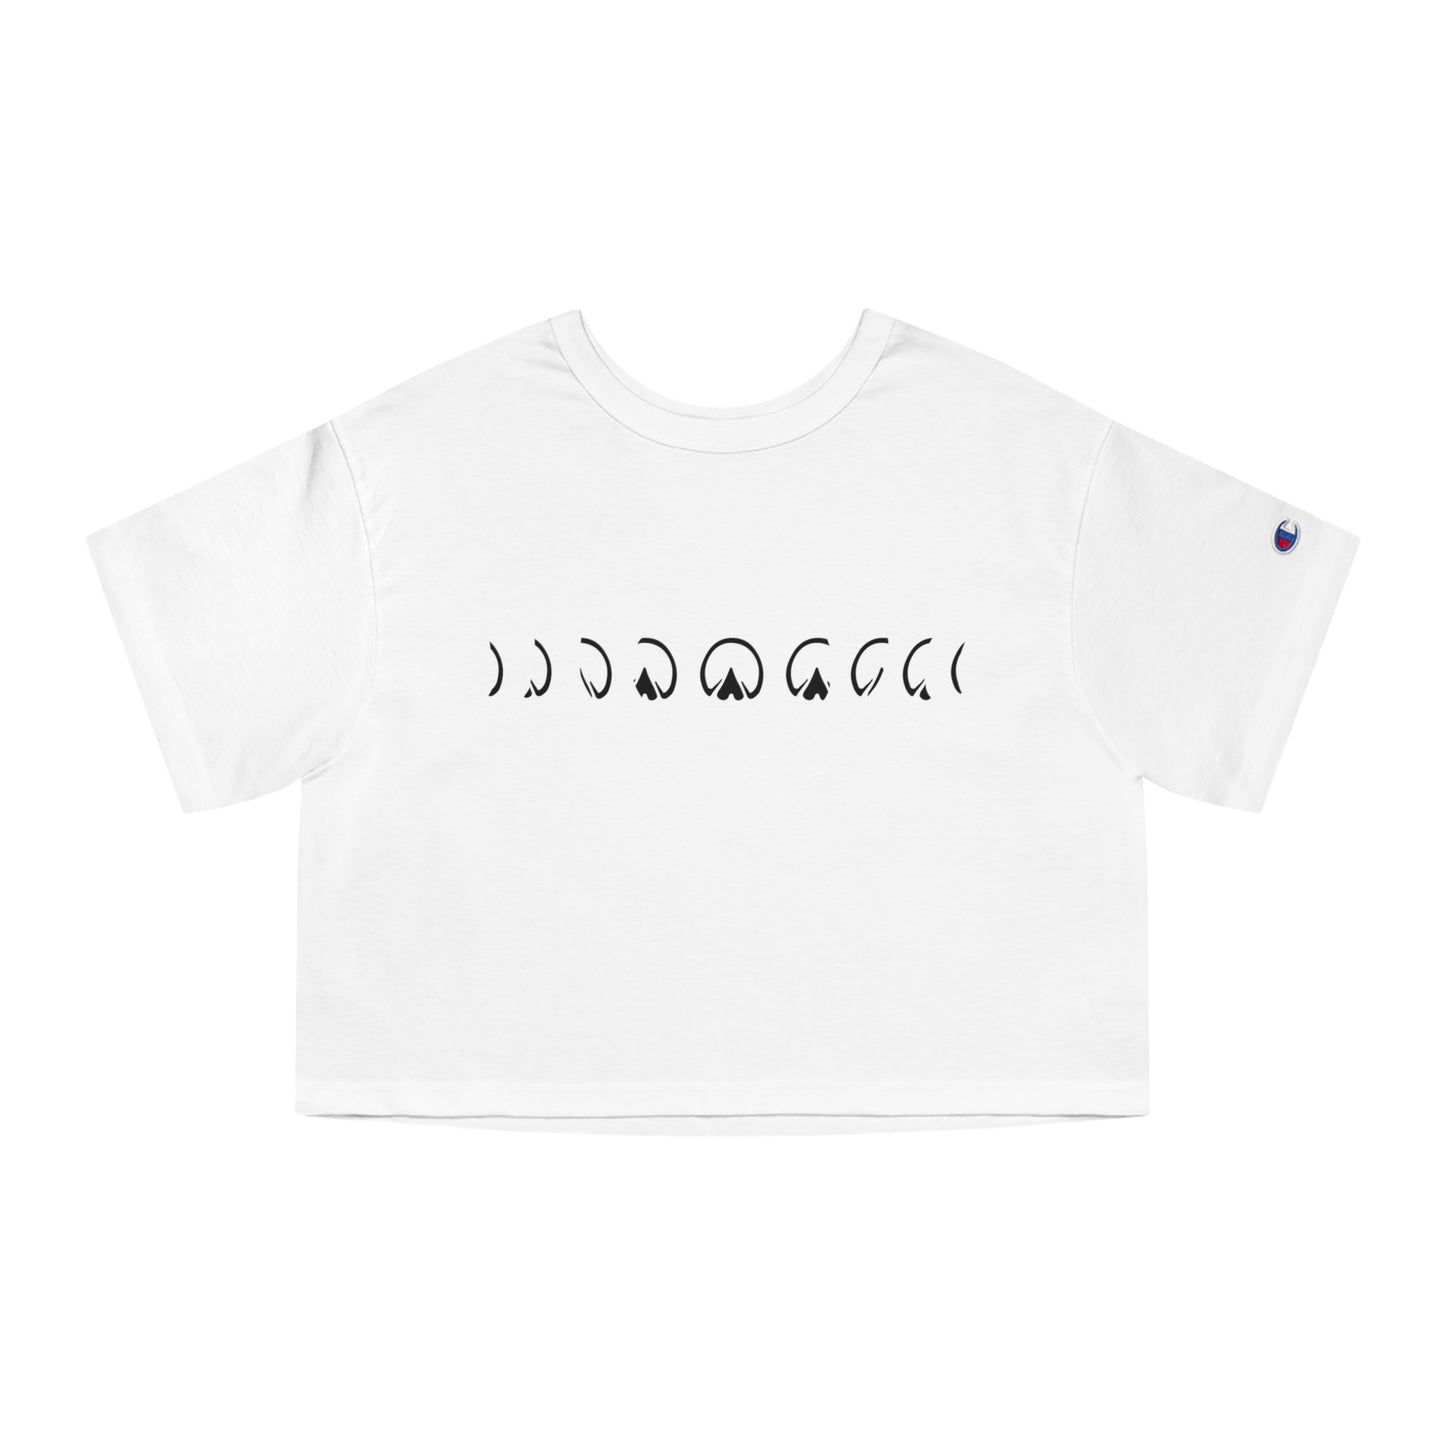 Barefoot Moon Phases Crop Top